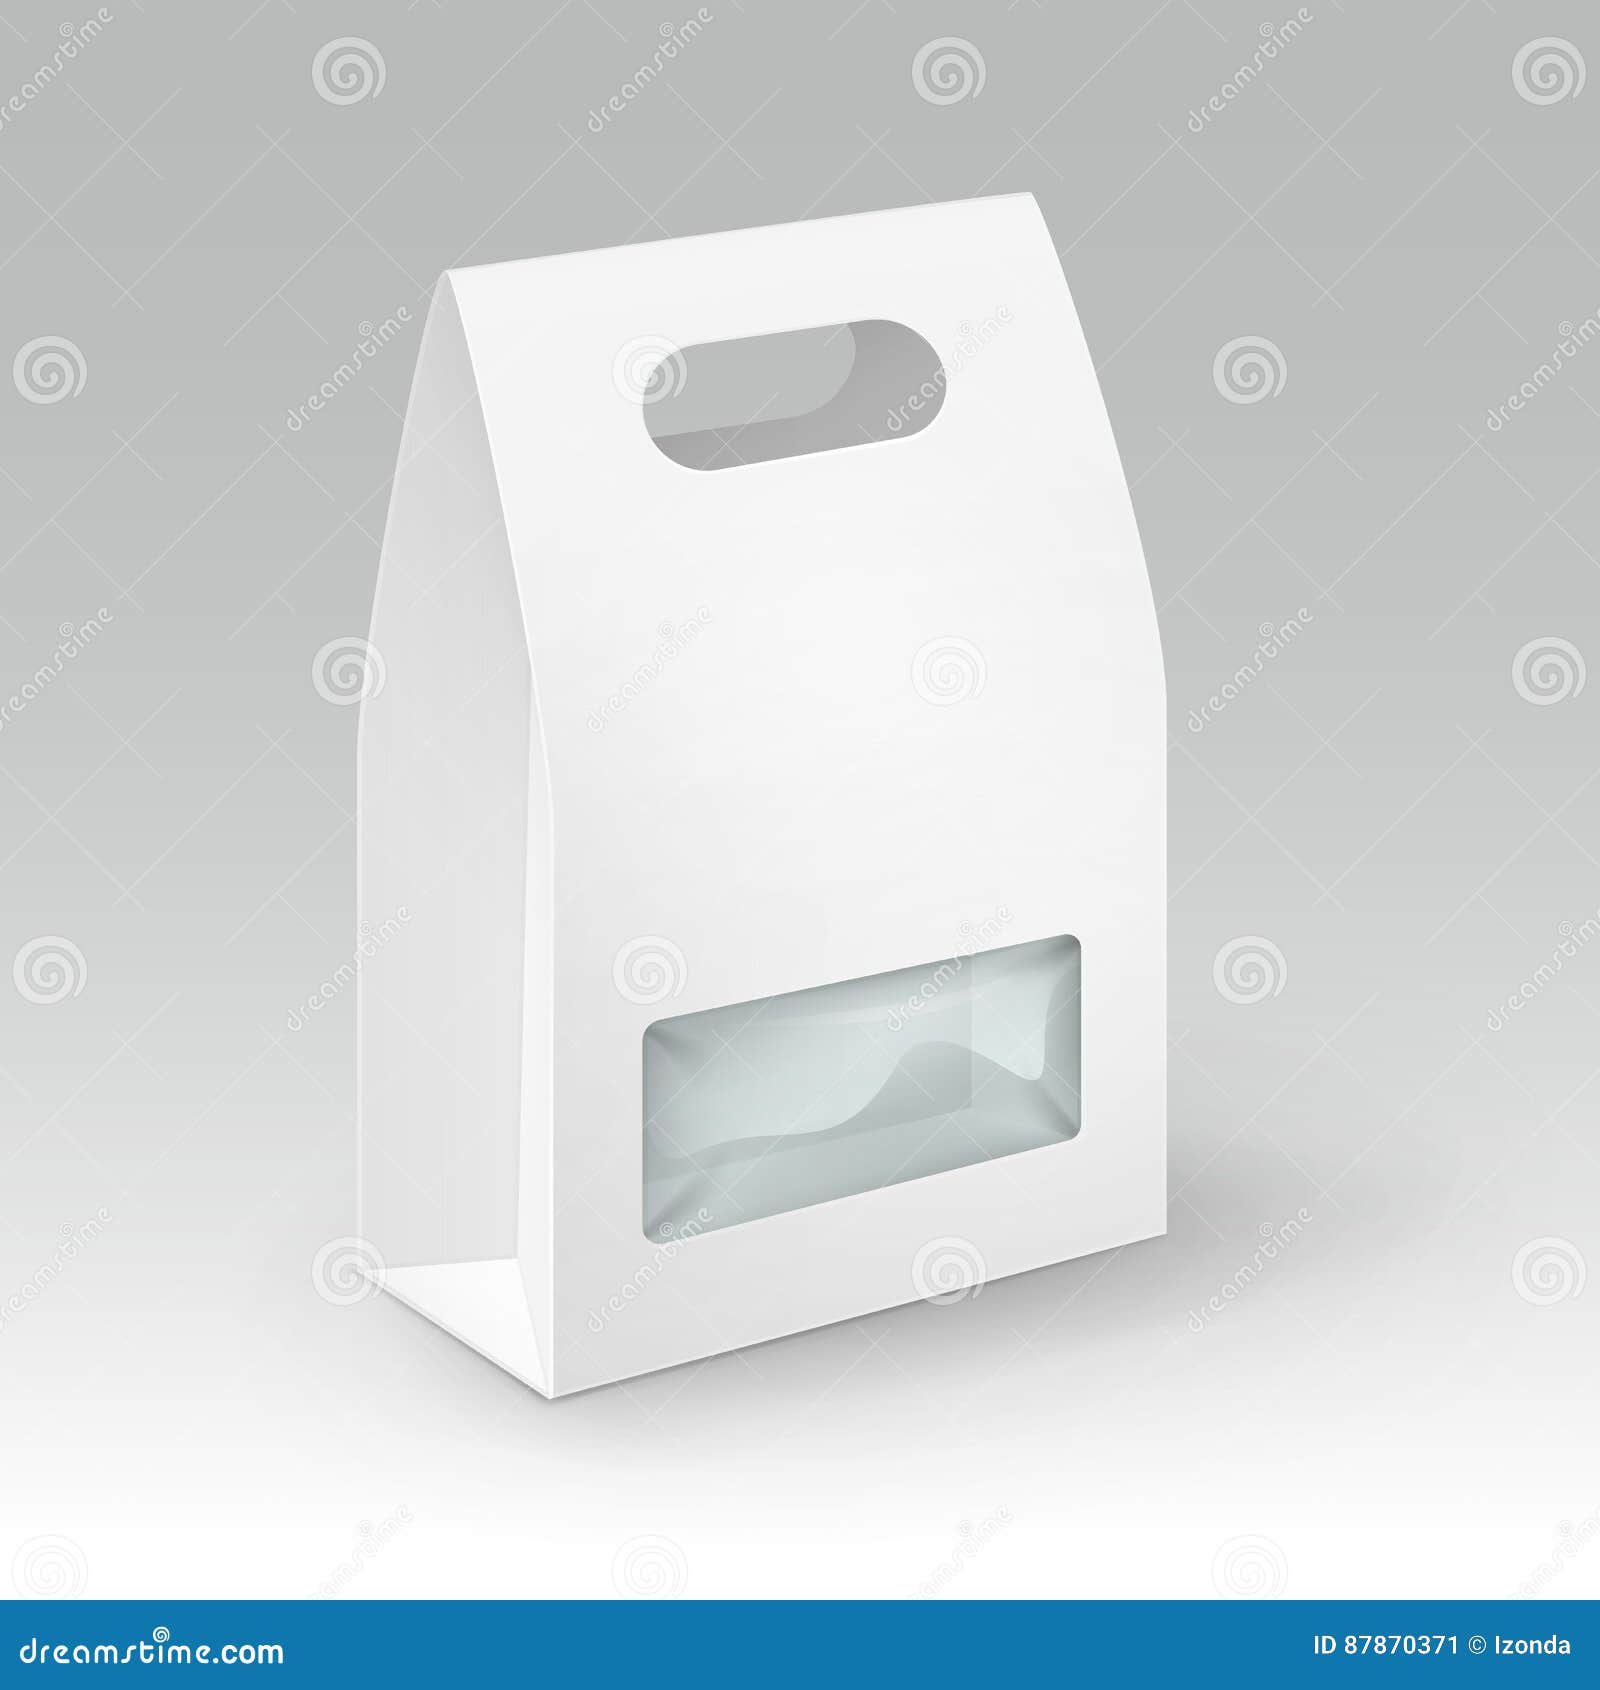 Download White Cardboard Handle Lunch Box Packaging For Sandwich, Food, Gift With Plastic Window Mock Up ...